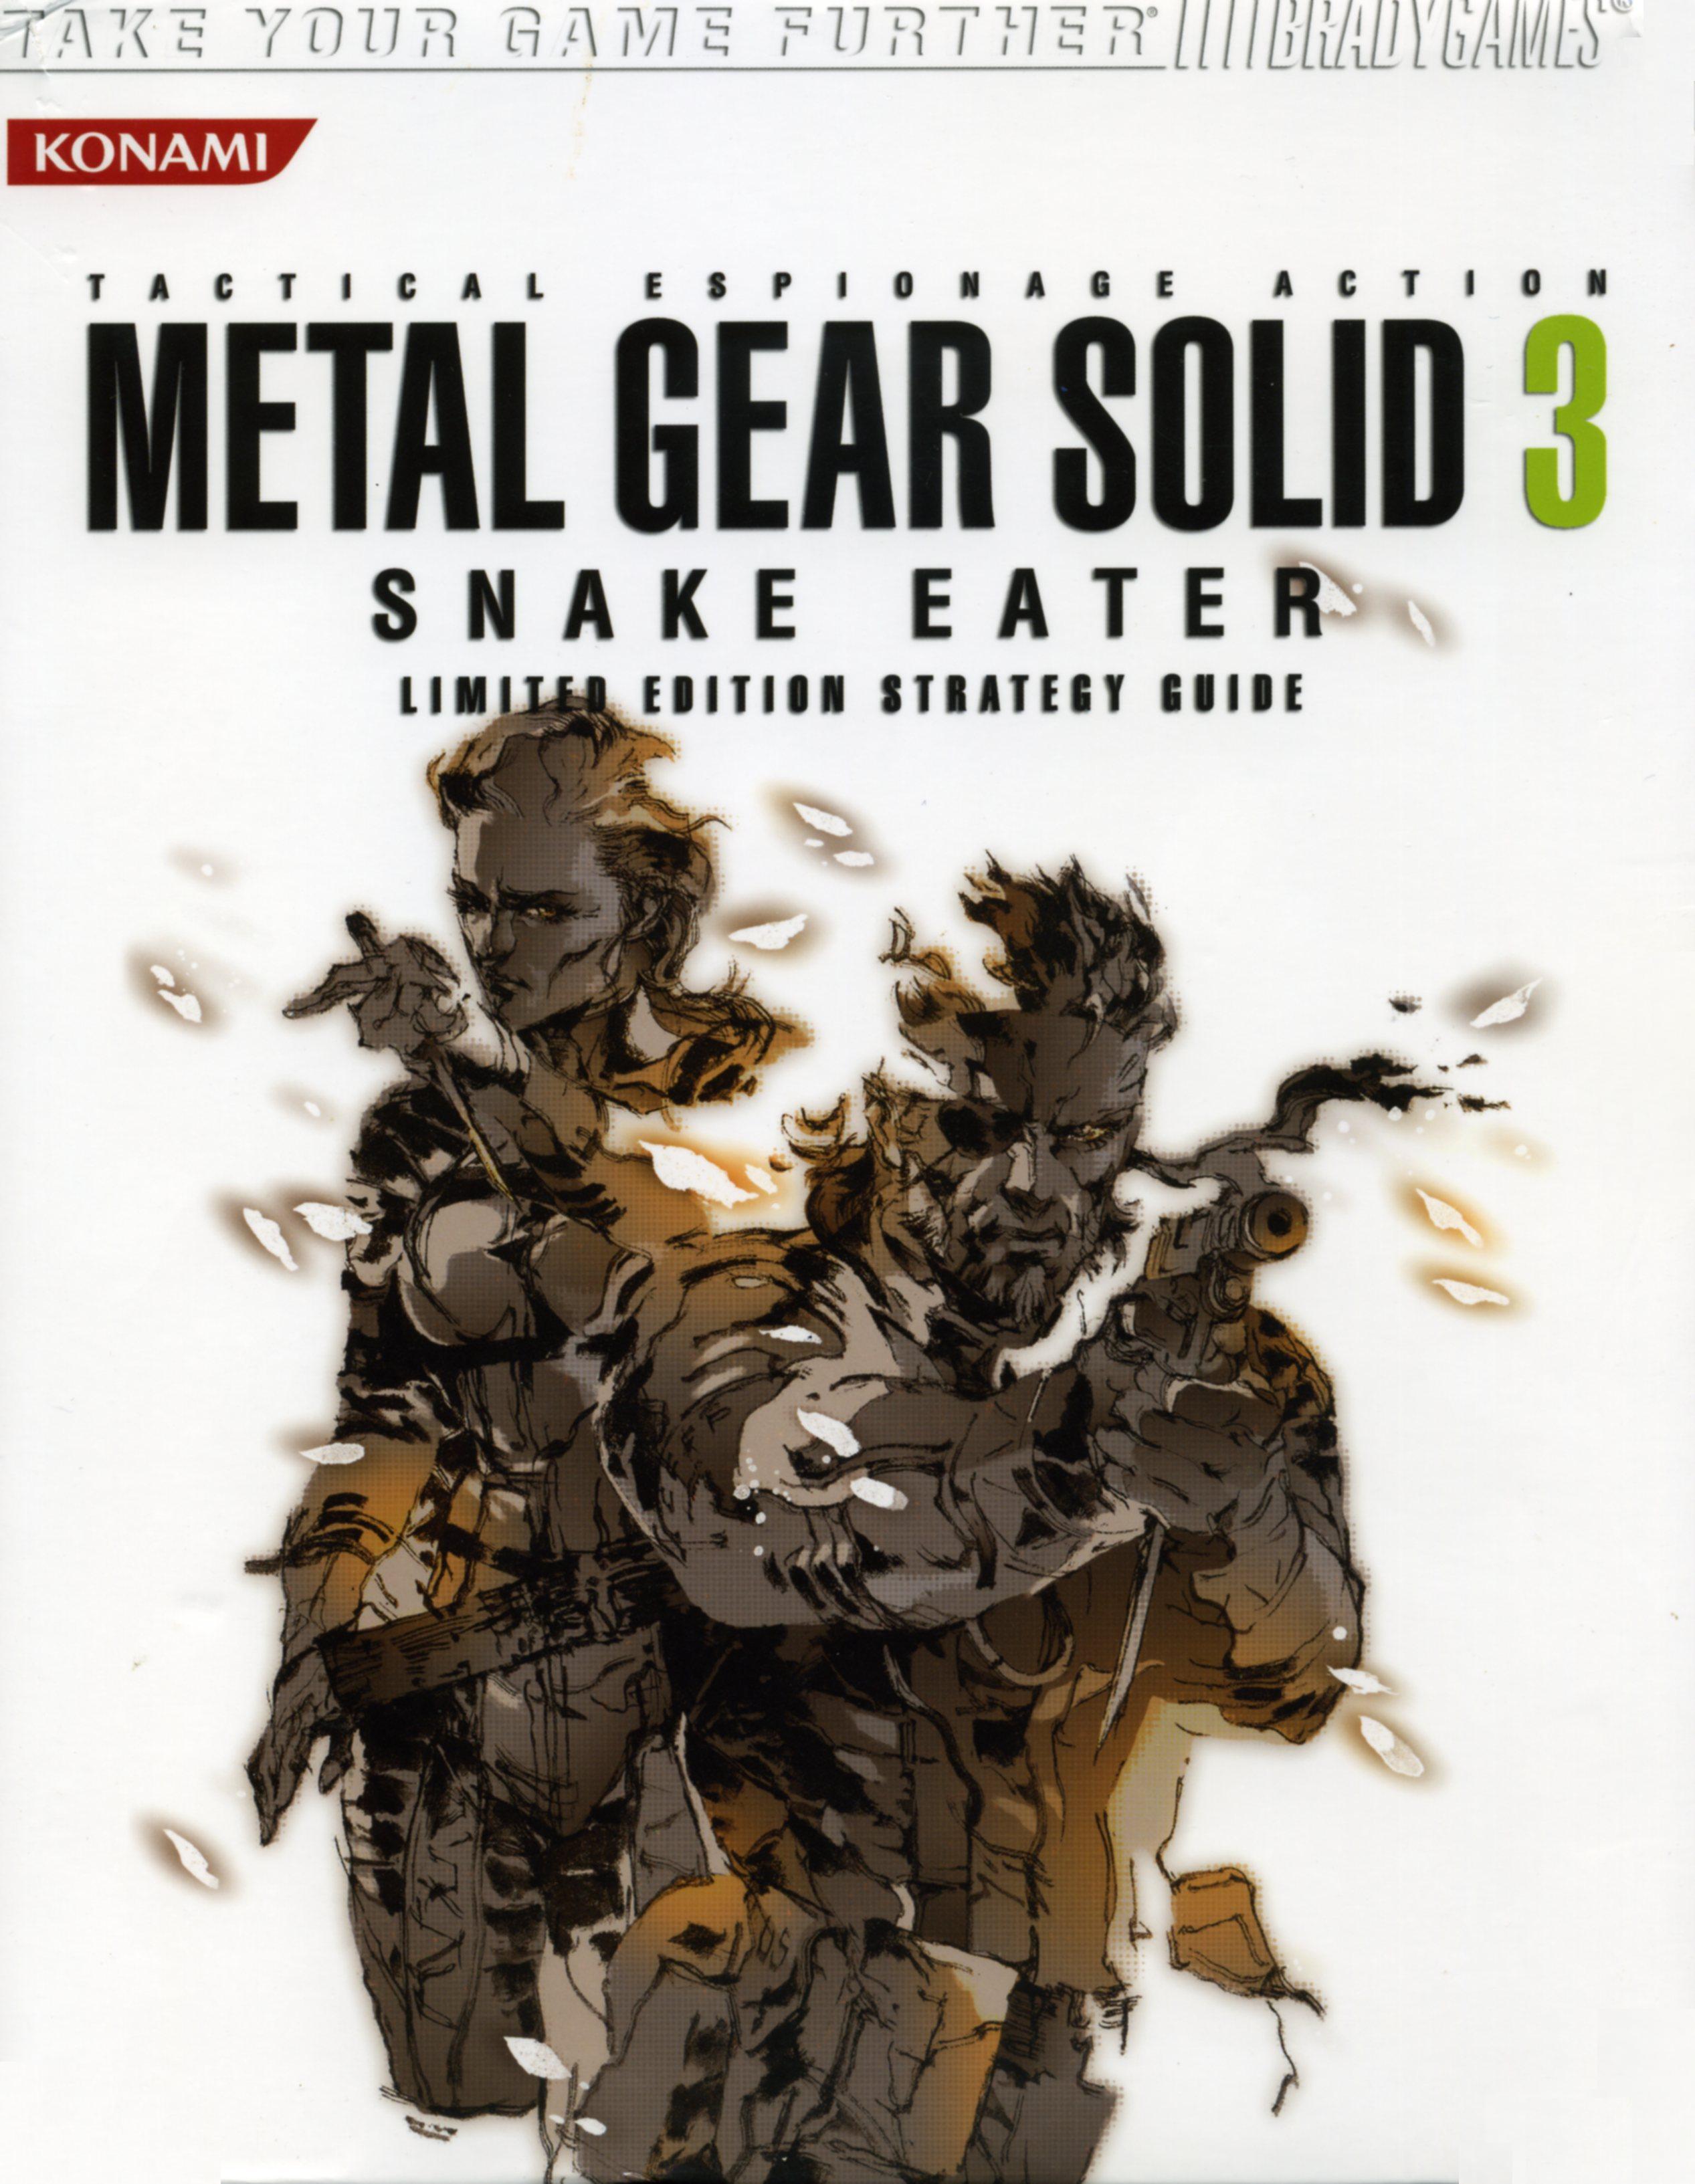 Metal-gear-solid-3-snake-eater-limited-edition-strategy-guide-001.jpg